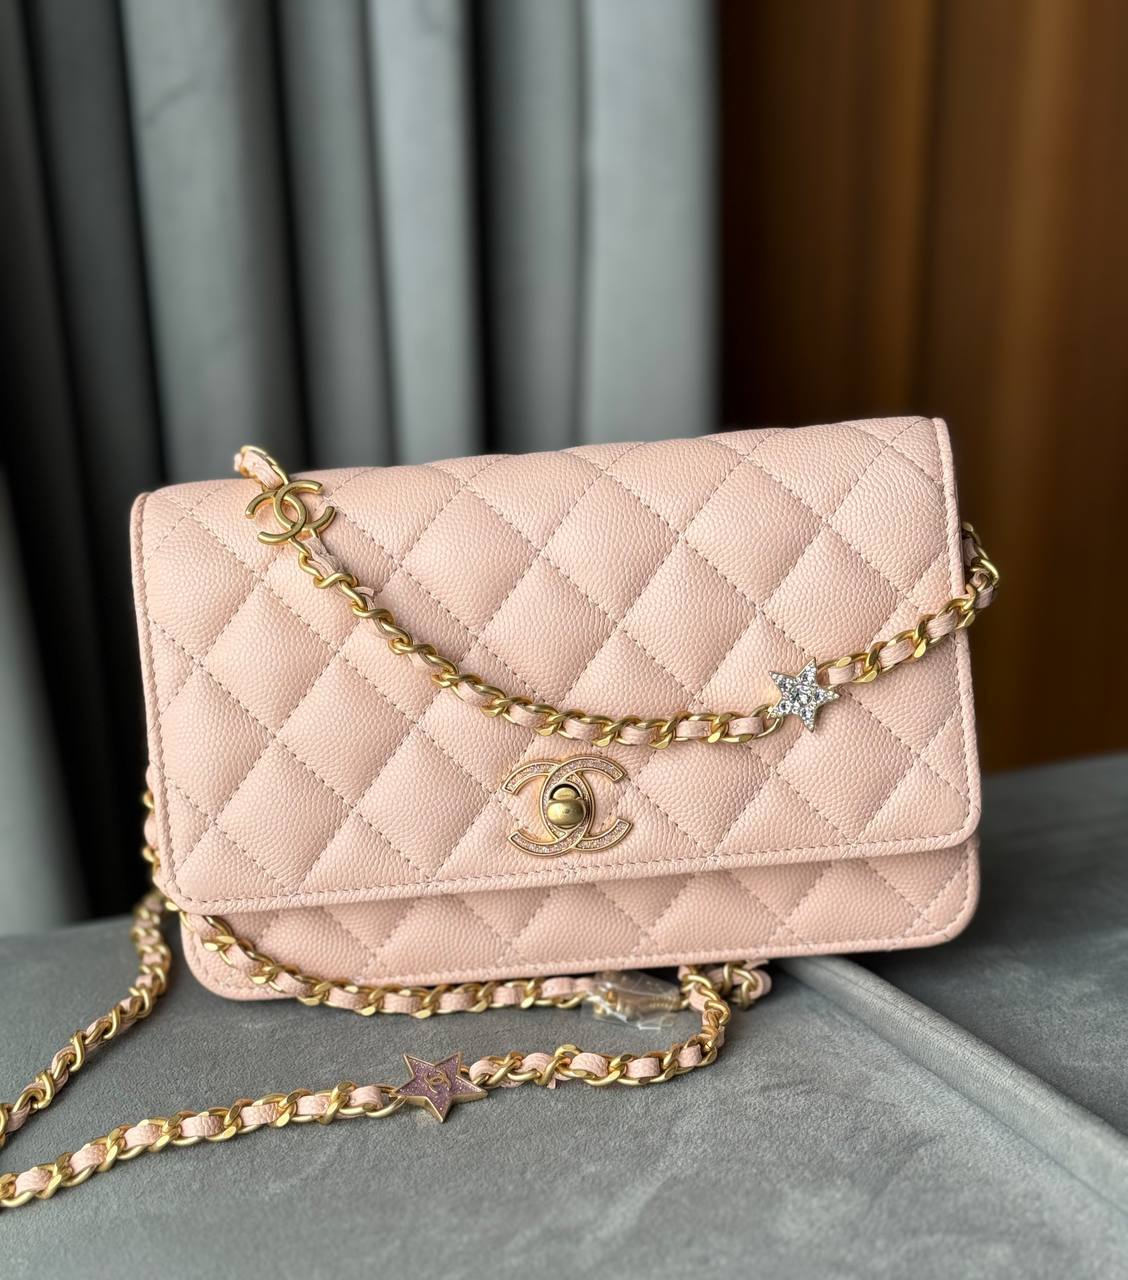 Chanel WOC Wallet On Chain Shiny Grained Calfskin Quilted Charms Enamel Strass Gold-Tone Metal Light Pink Bag Handbag